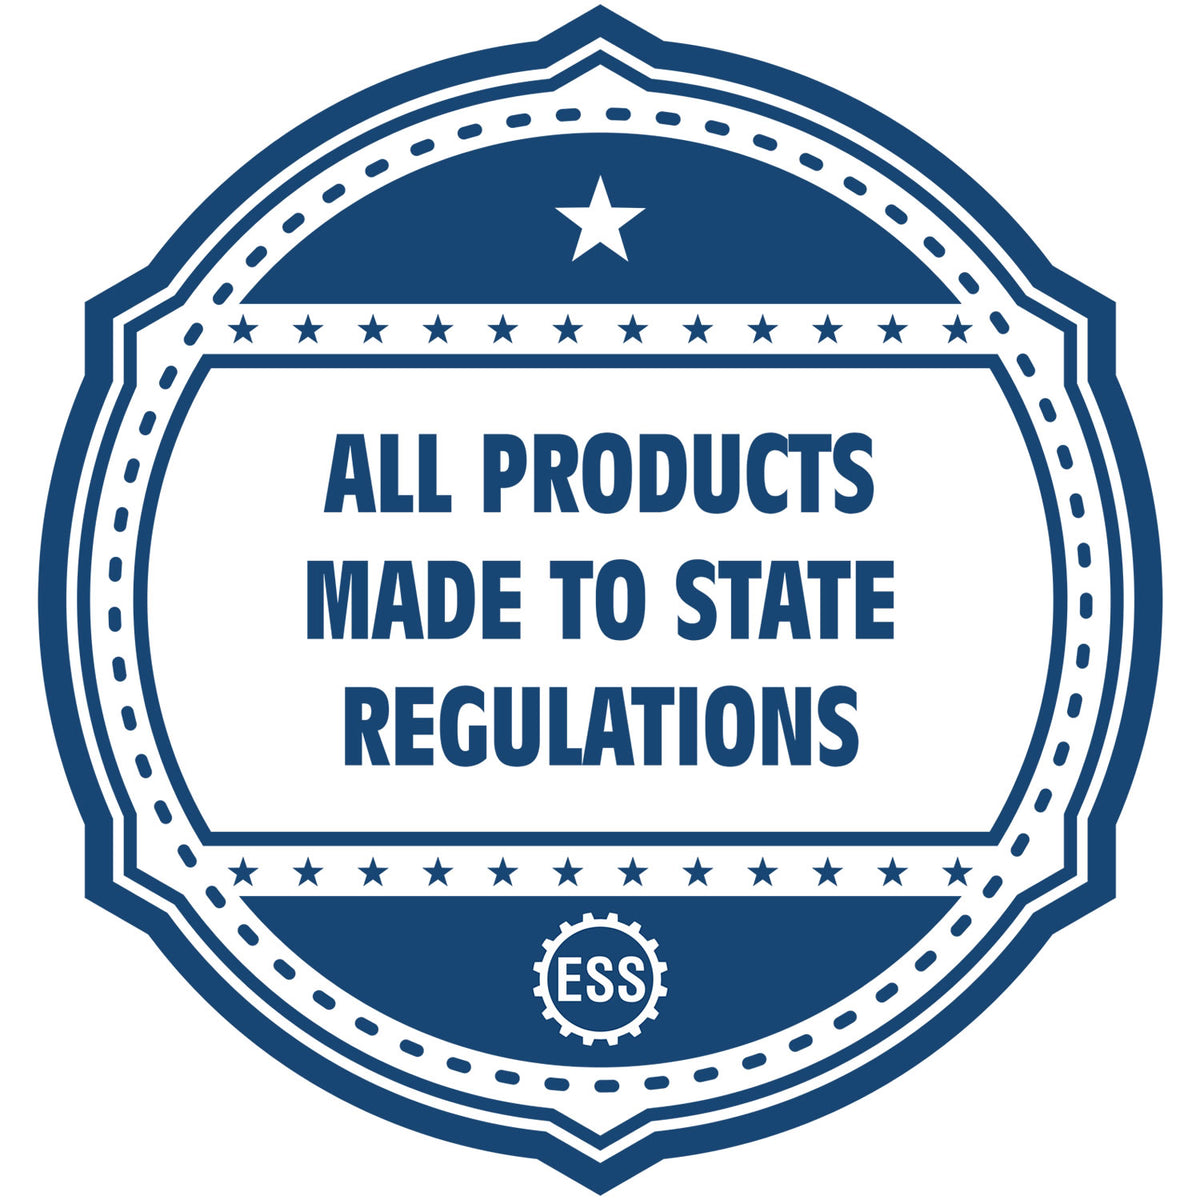 An icon or badge element for the Self-Inking West Virginia PE Stamp showing that this product is made in compliance with state regulations.